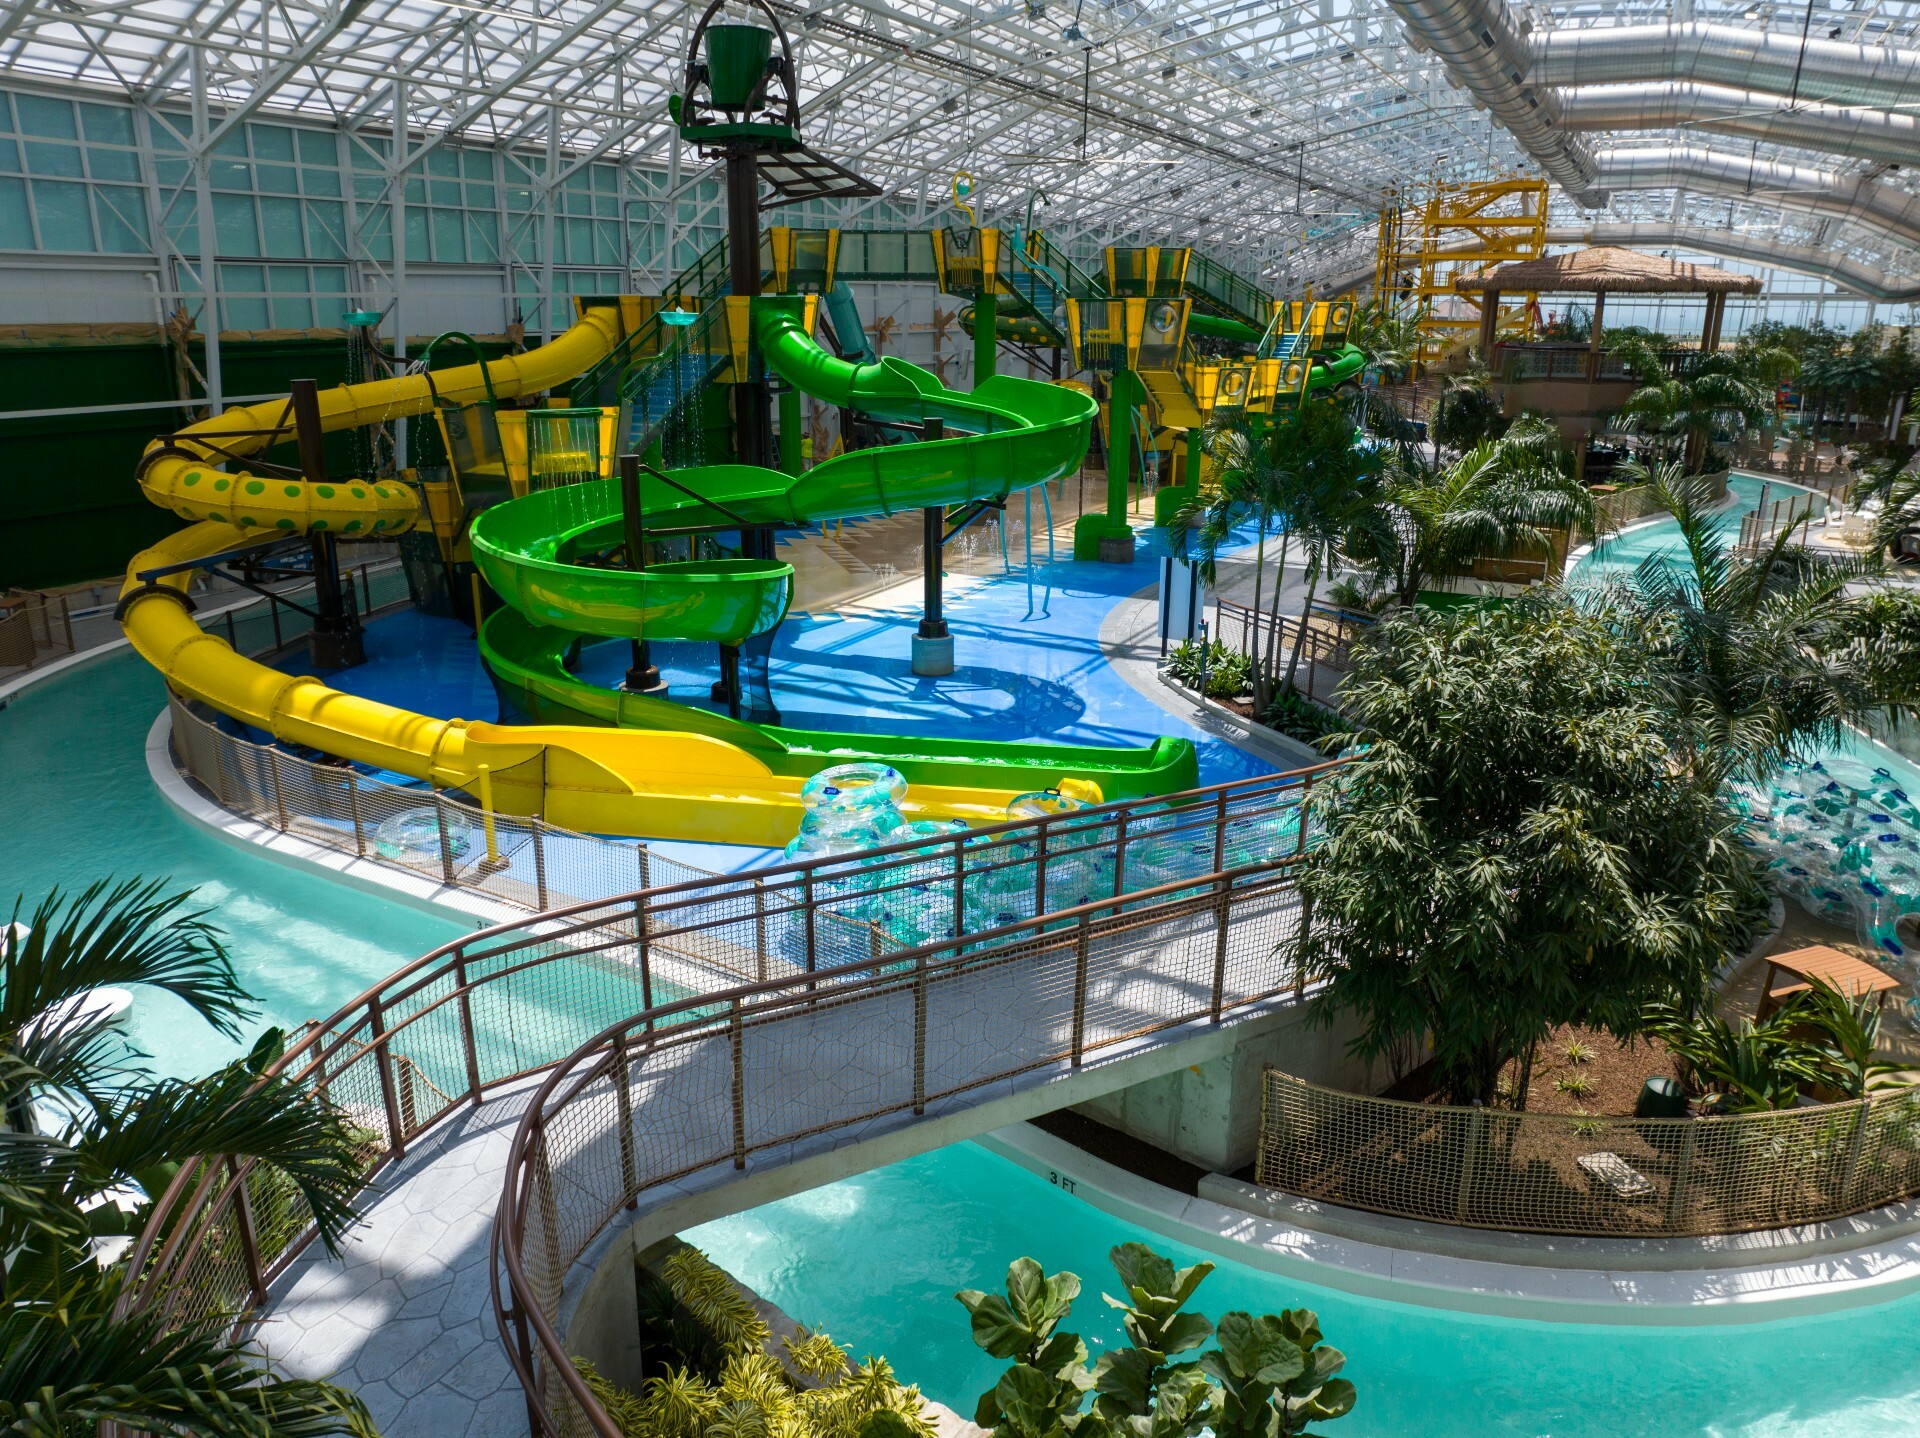 a view of slides and a lazy river at ISLAND Waterpark in Atlantic City